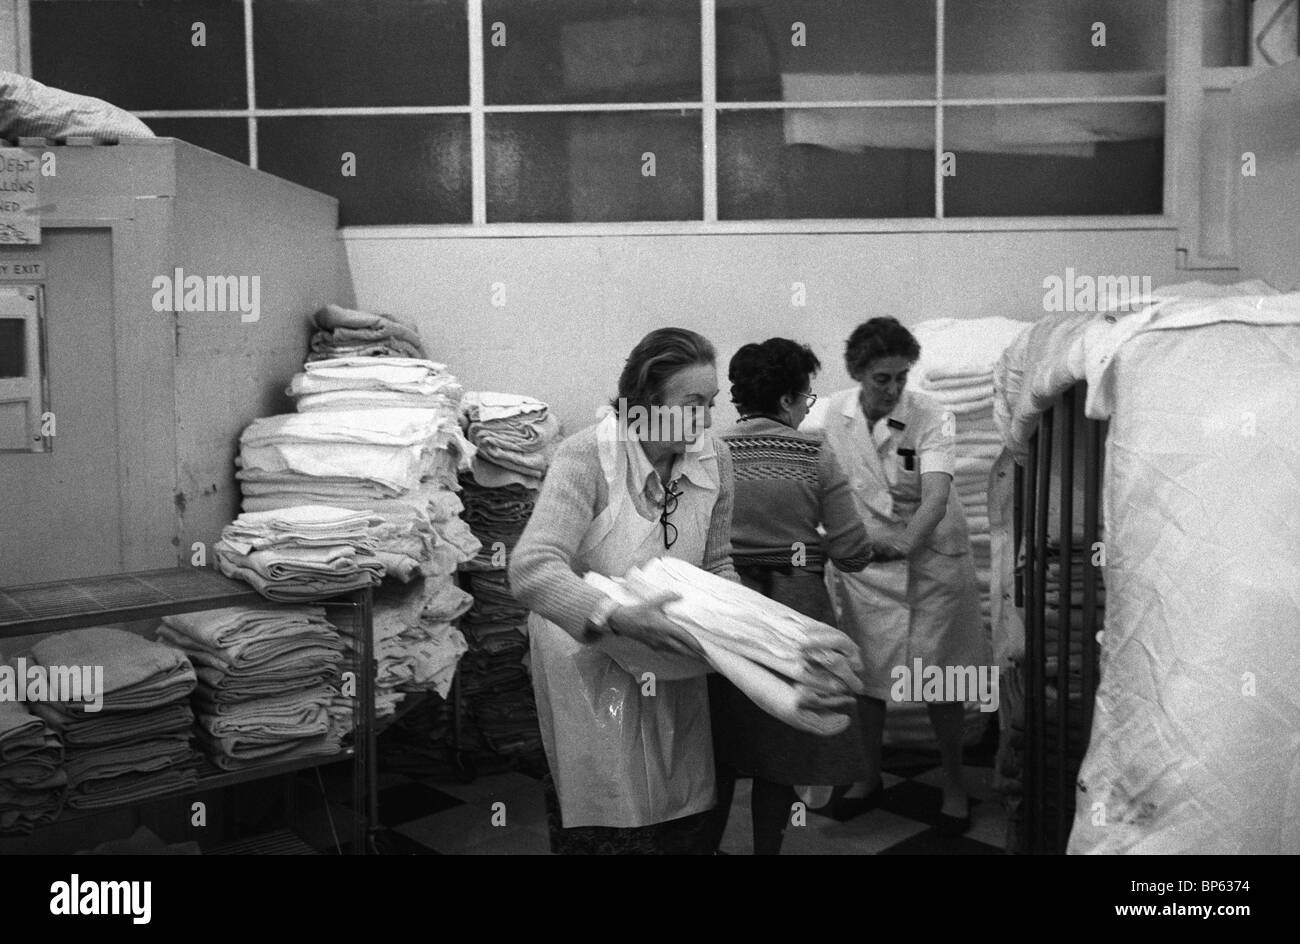 Winter of Discontent London 1979 UK. Family & friends come in to help those staff not striking. Westminster hospital laundry room. 1970s  HOMER SYKES Stock Photo